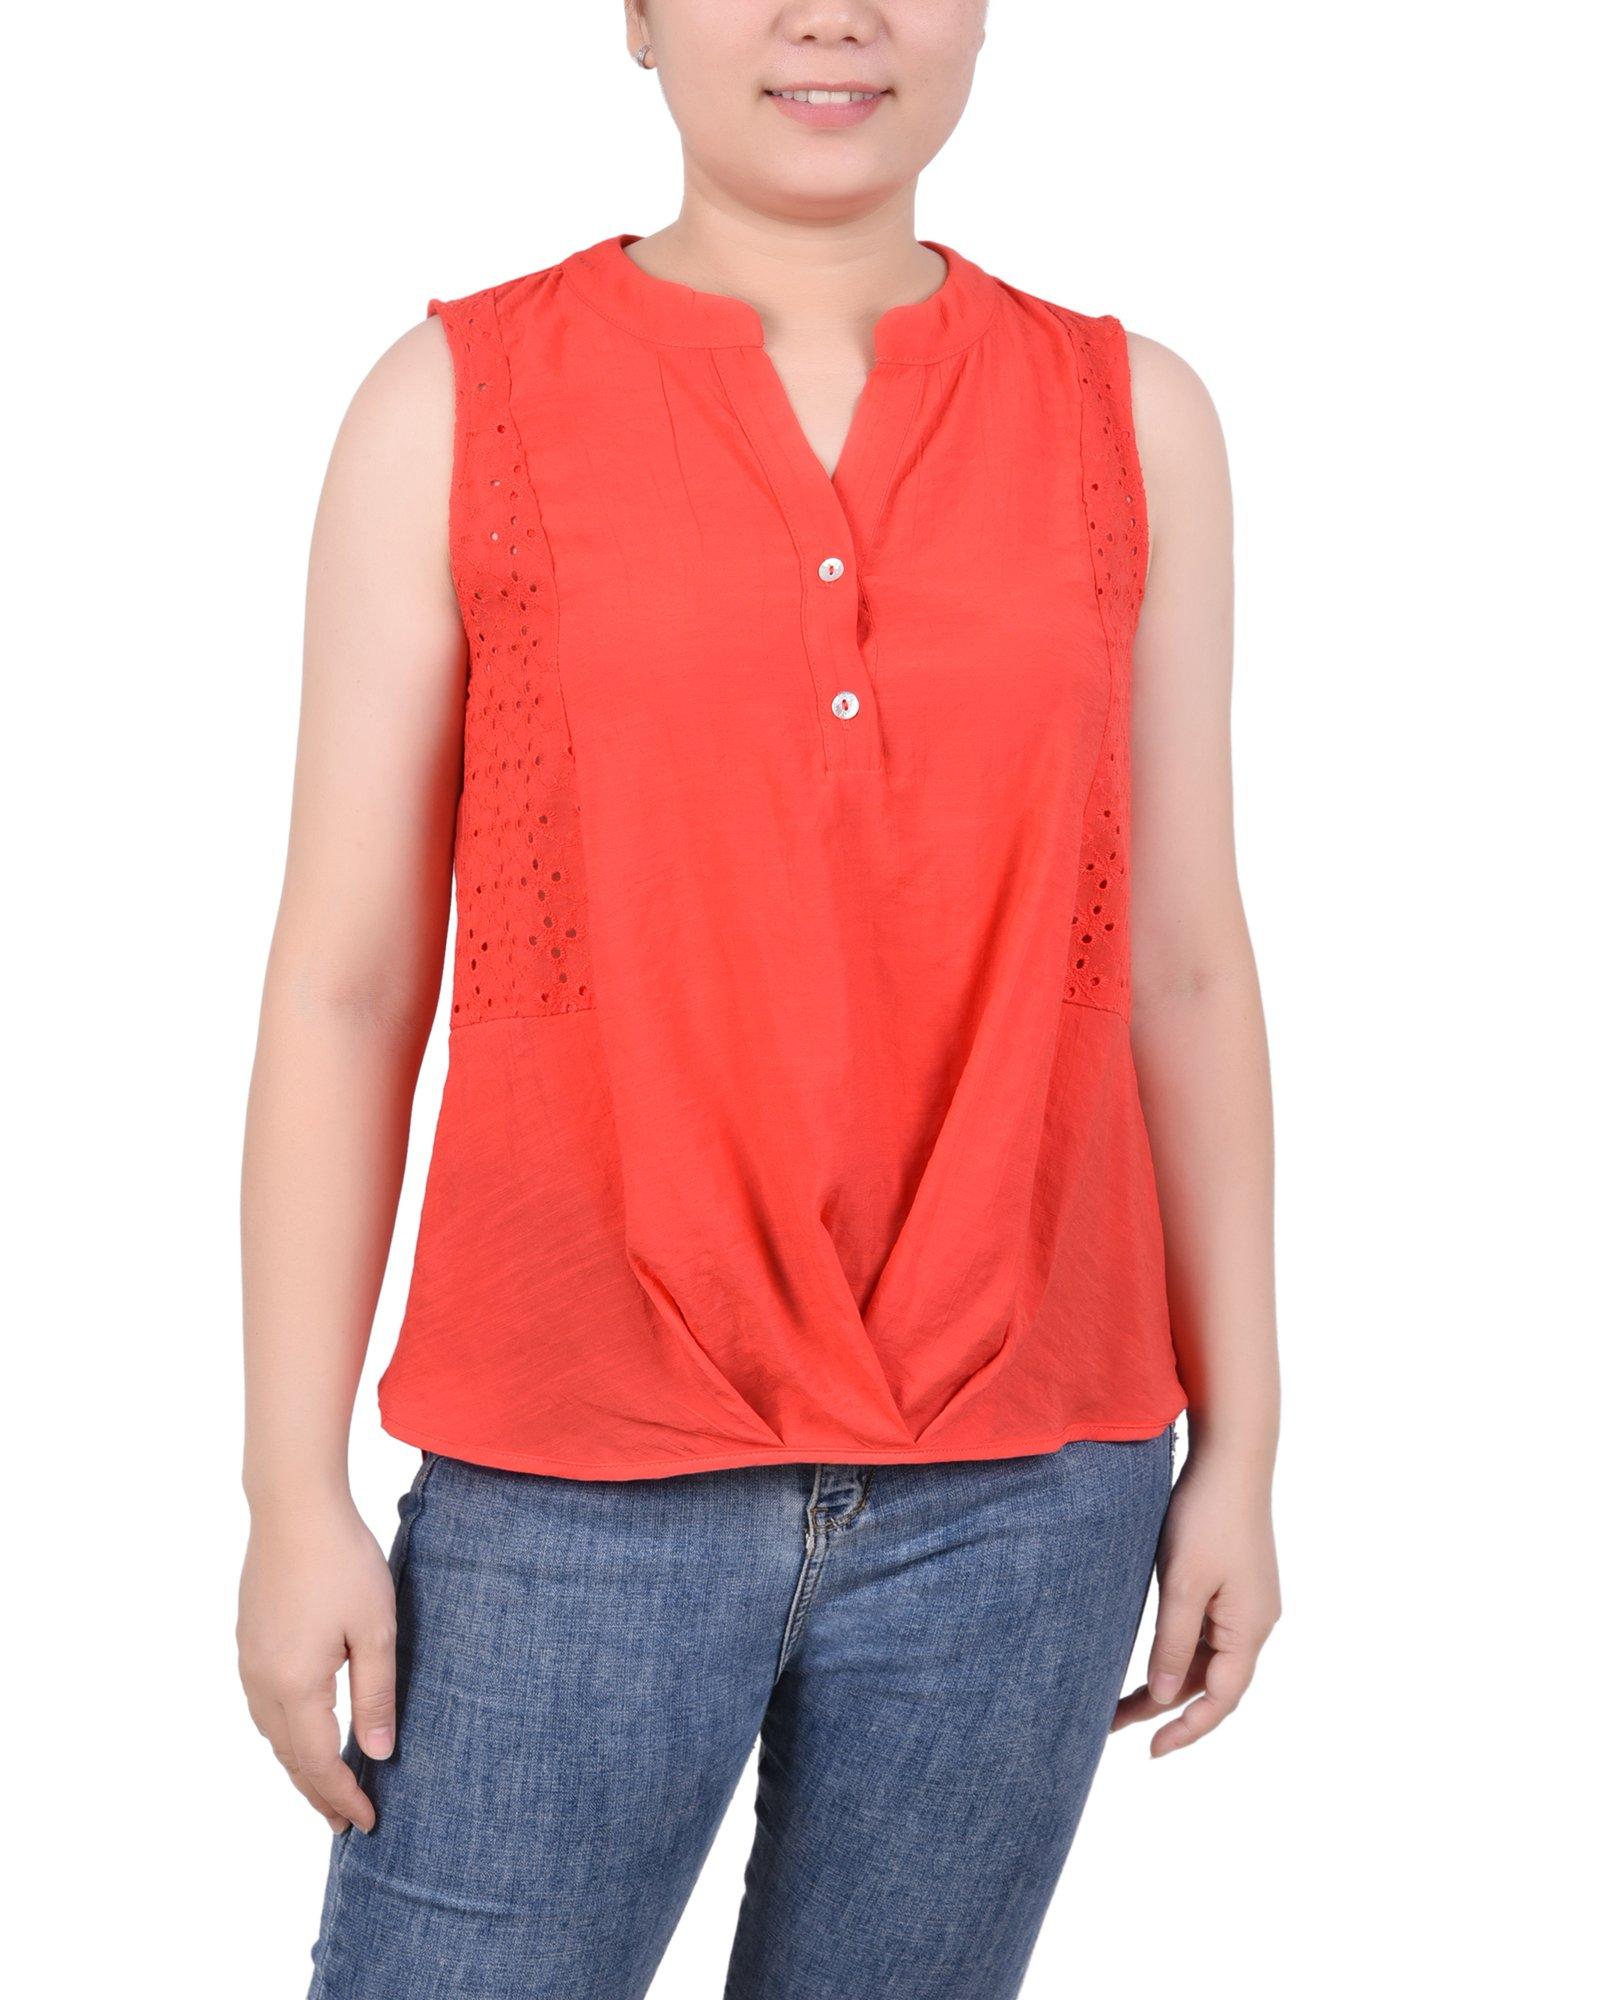 Womens Sleeveless Blouse With Eyelet Insets